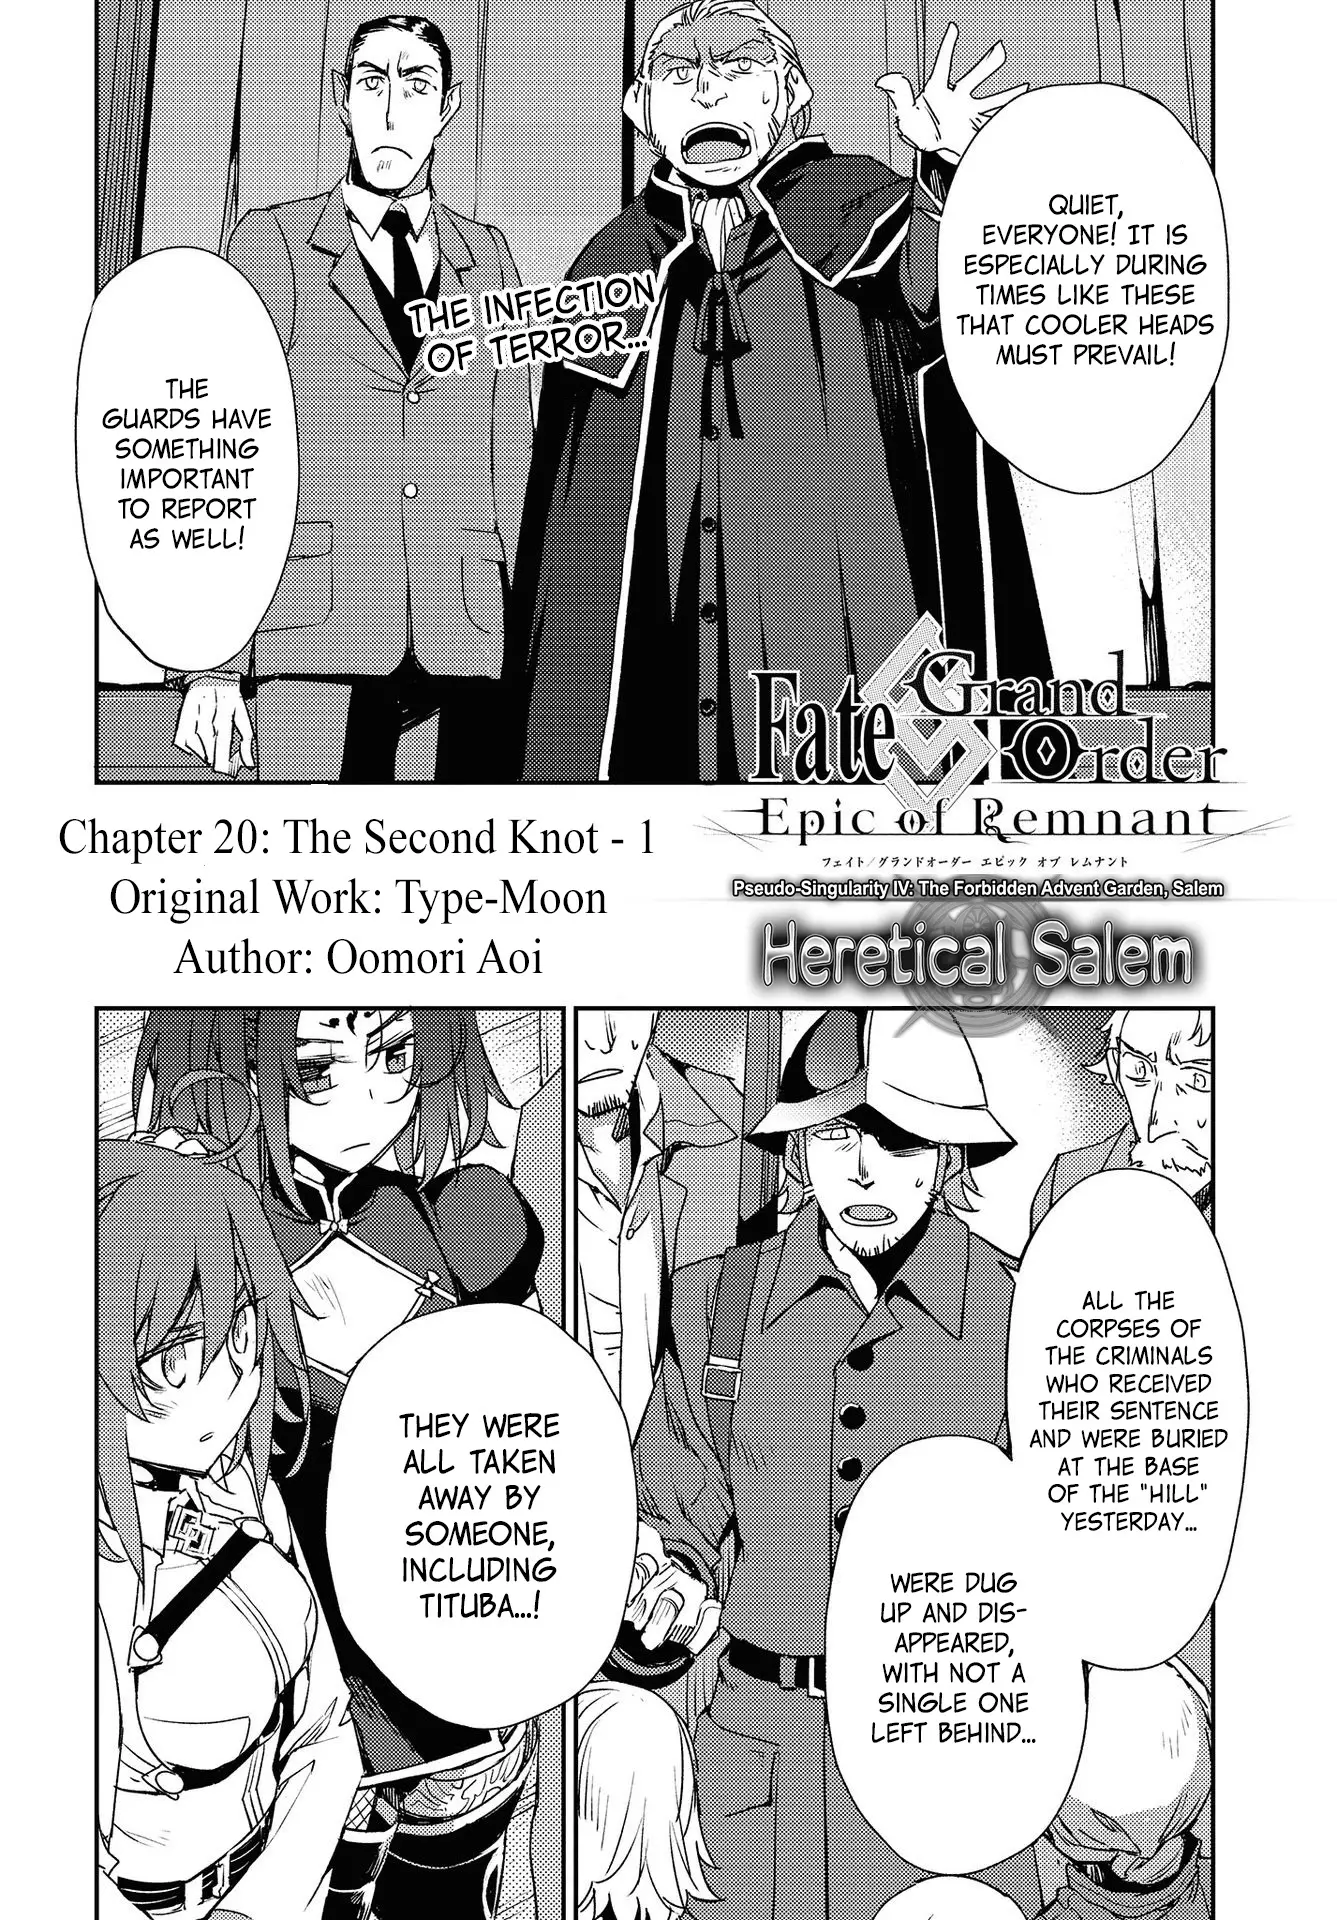 Fate/grand Order: Epic Of Remnant: Pseudo-Singularity Iv: The Forbidden Advent Garden, Salem - Heretical Salem - 20 page 4-062e521a